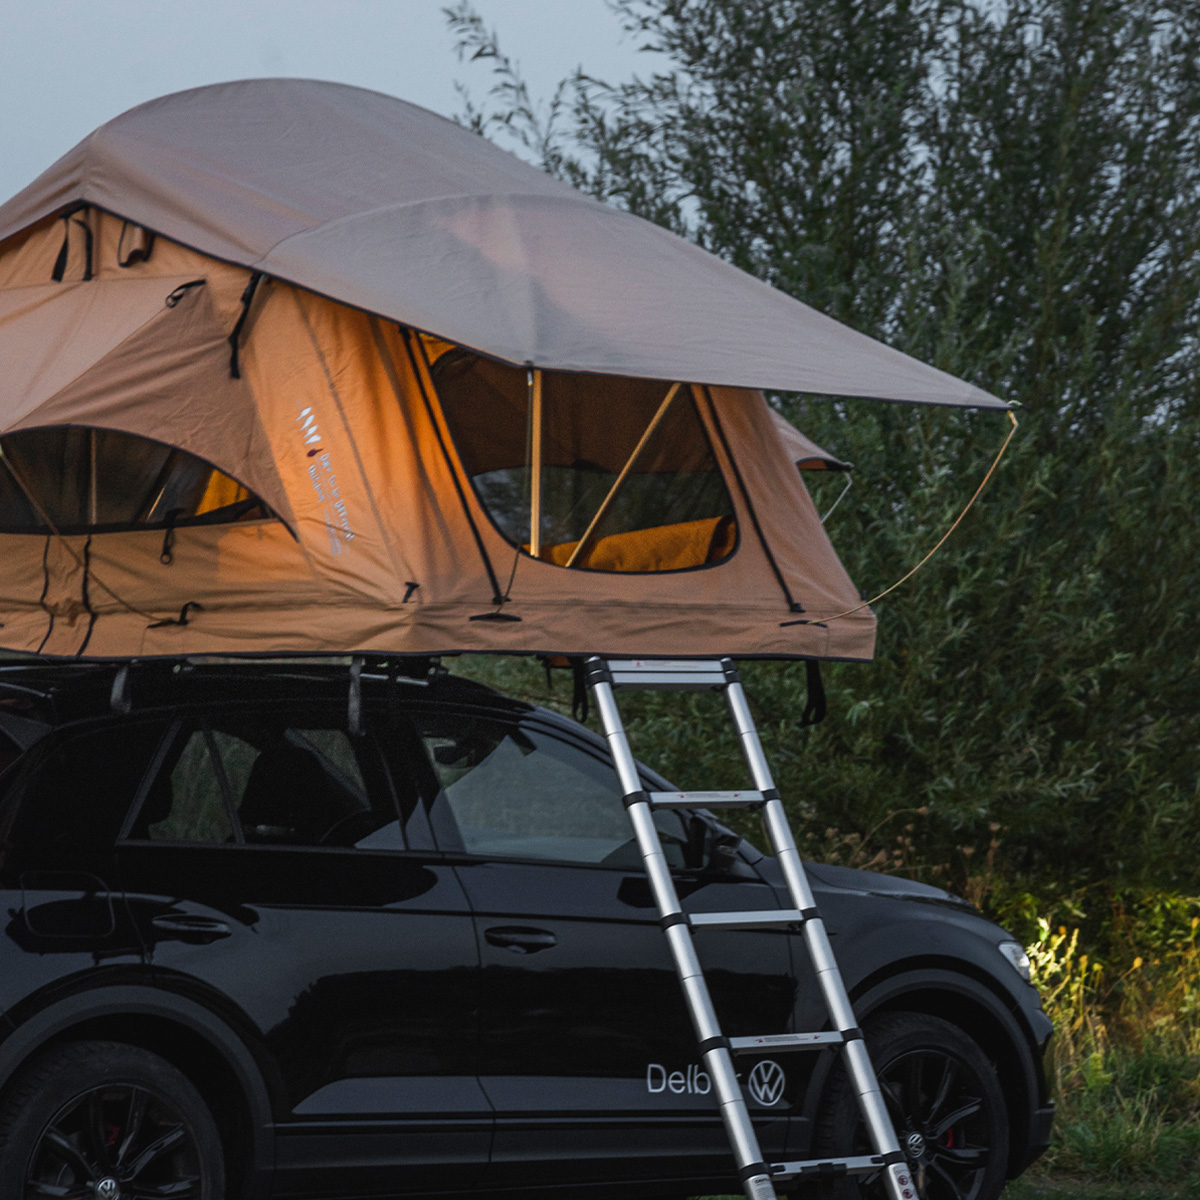 How does the ladder of my DTBD Outdoor rooftop tent work?